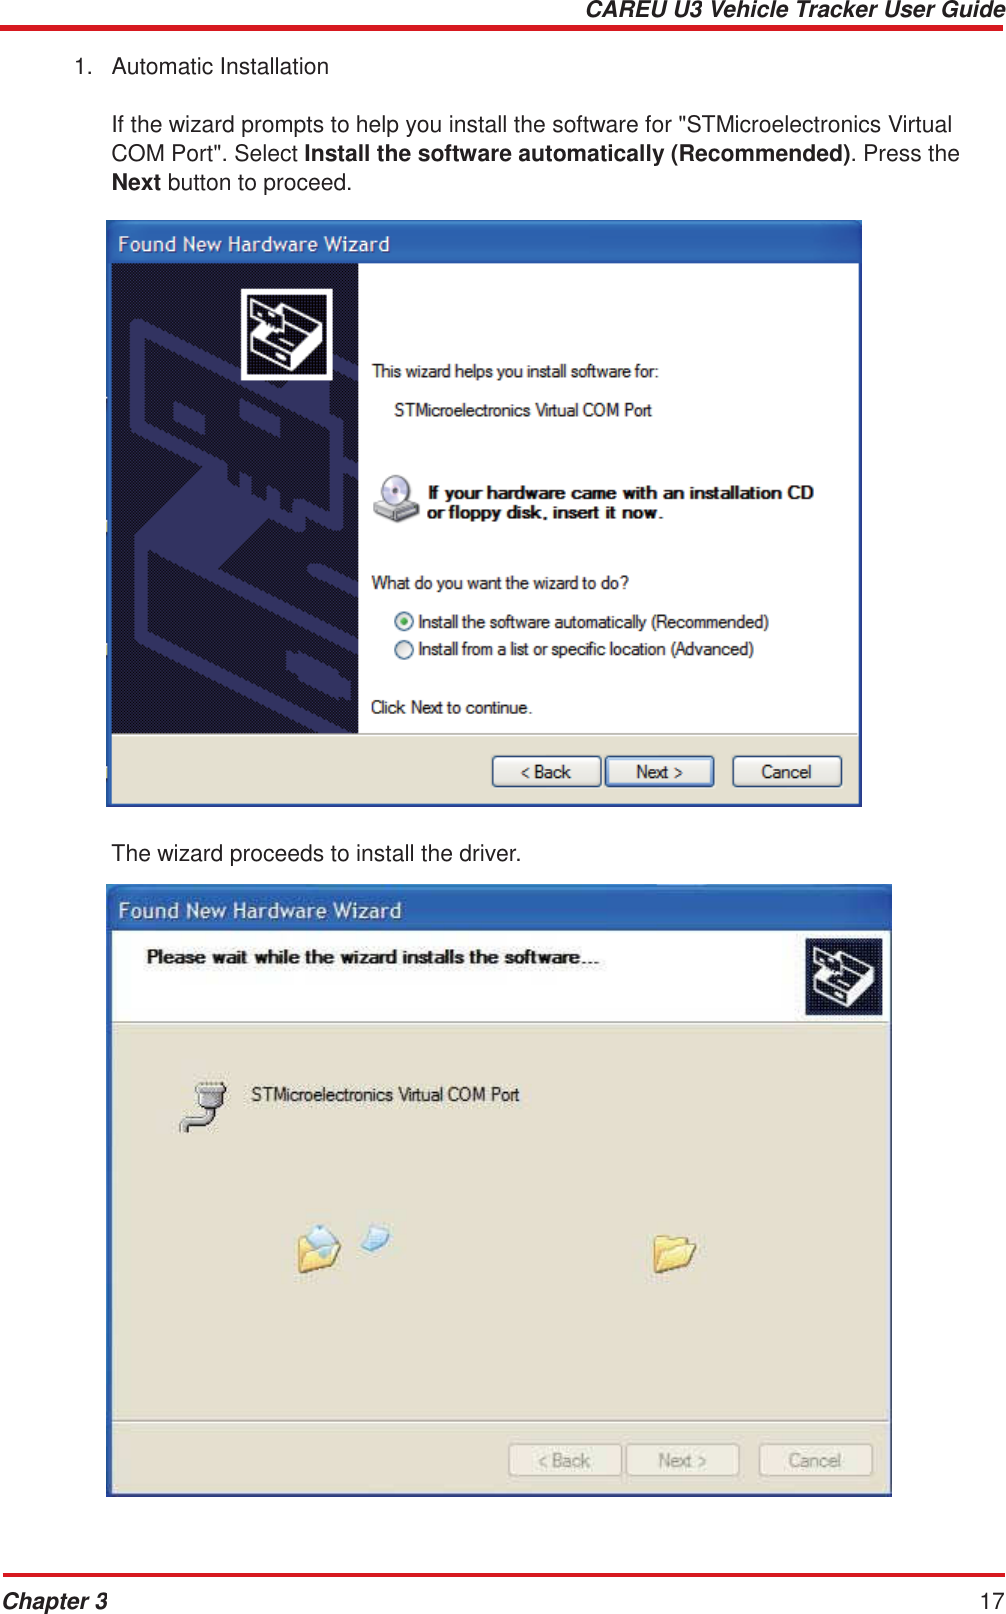 CAREU U3 Vehicle Tracker User Guide Chapter 3 17    1.   Automatic Installation   If the wizard prompts to help you install the software for &quot;STMicroelectronics Virtual COM Port&quot;. Select Install the software automatically (Recommended). Press the Next button to proceed.     The wizard proceeds to install the driver.   